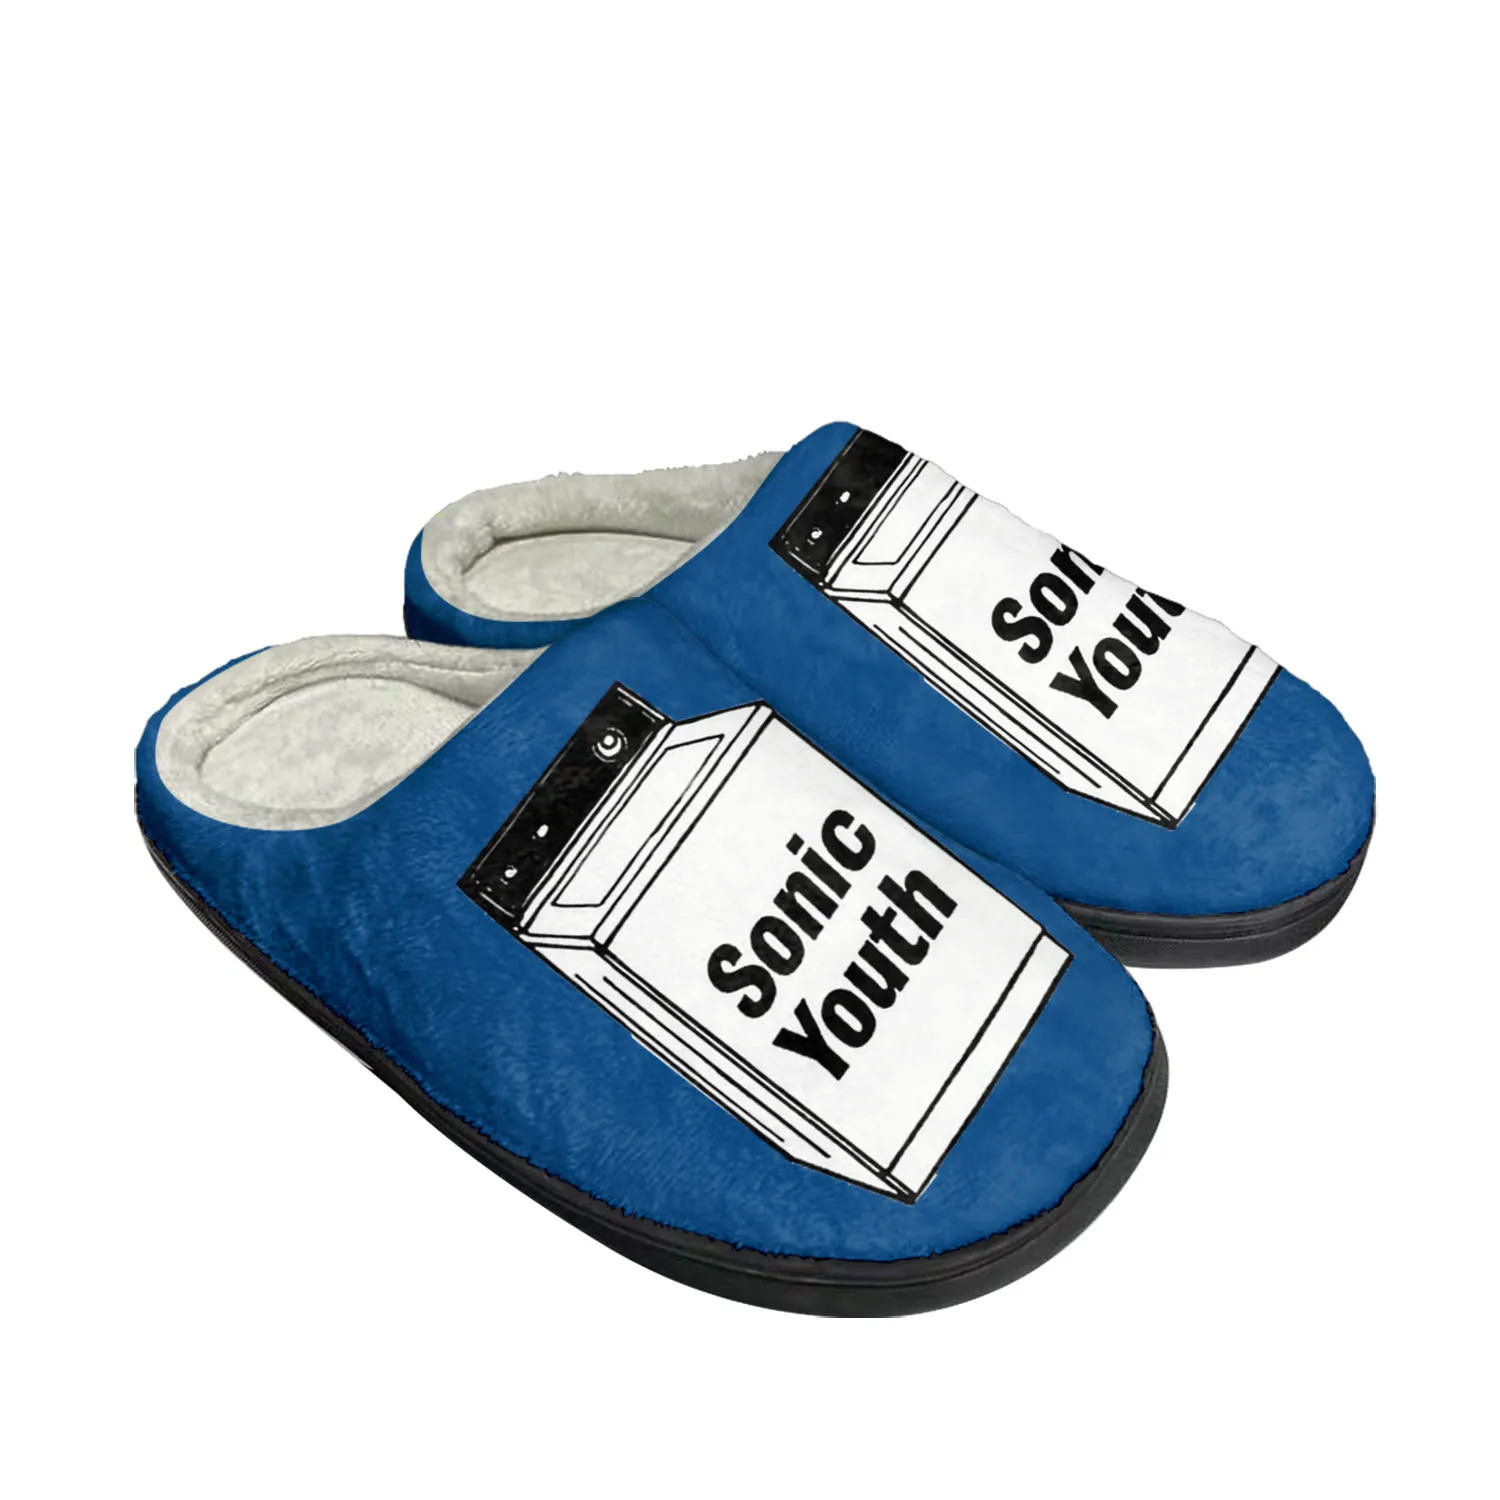 

Sonic Youth Rock Punk Home Cotton Custom Slippers Mens Womens Sandals Plush Bedroom Casual Keep Warm Shoe Thermal Slipper Black